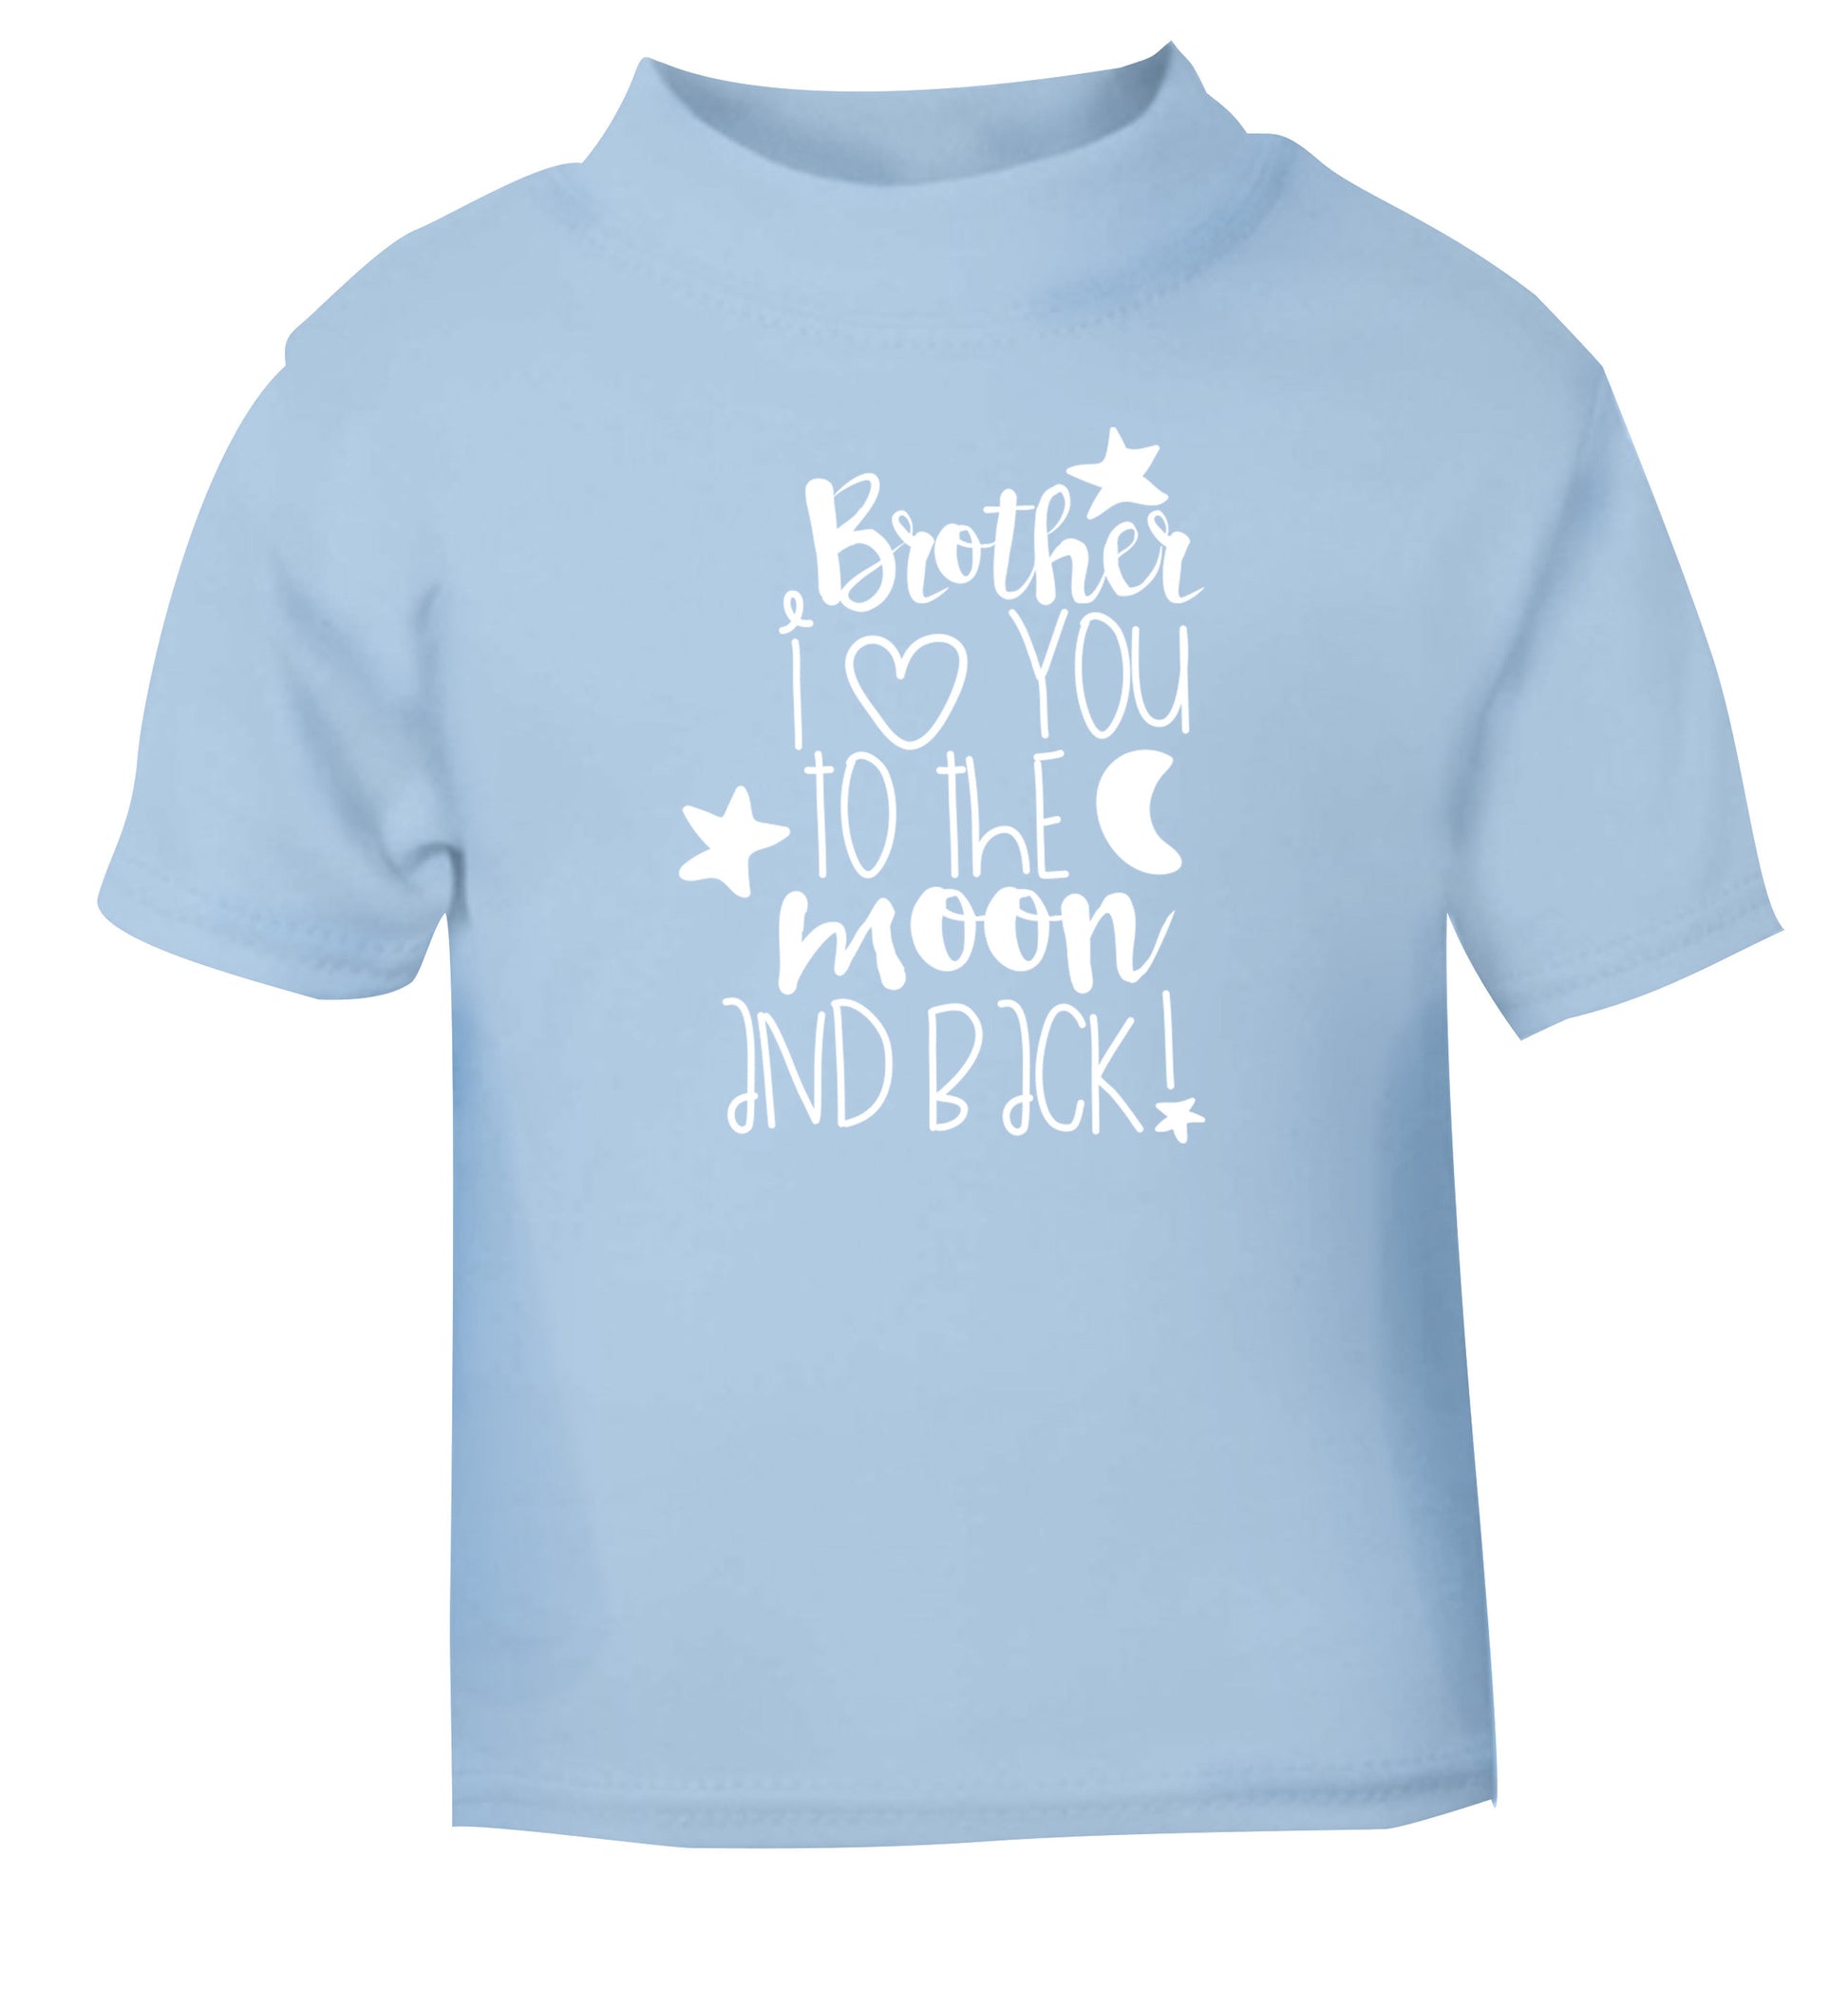 Brother I love you to the moon and back light blue Baby Toddler Tshirt 2 Years